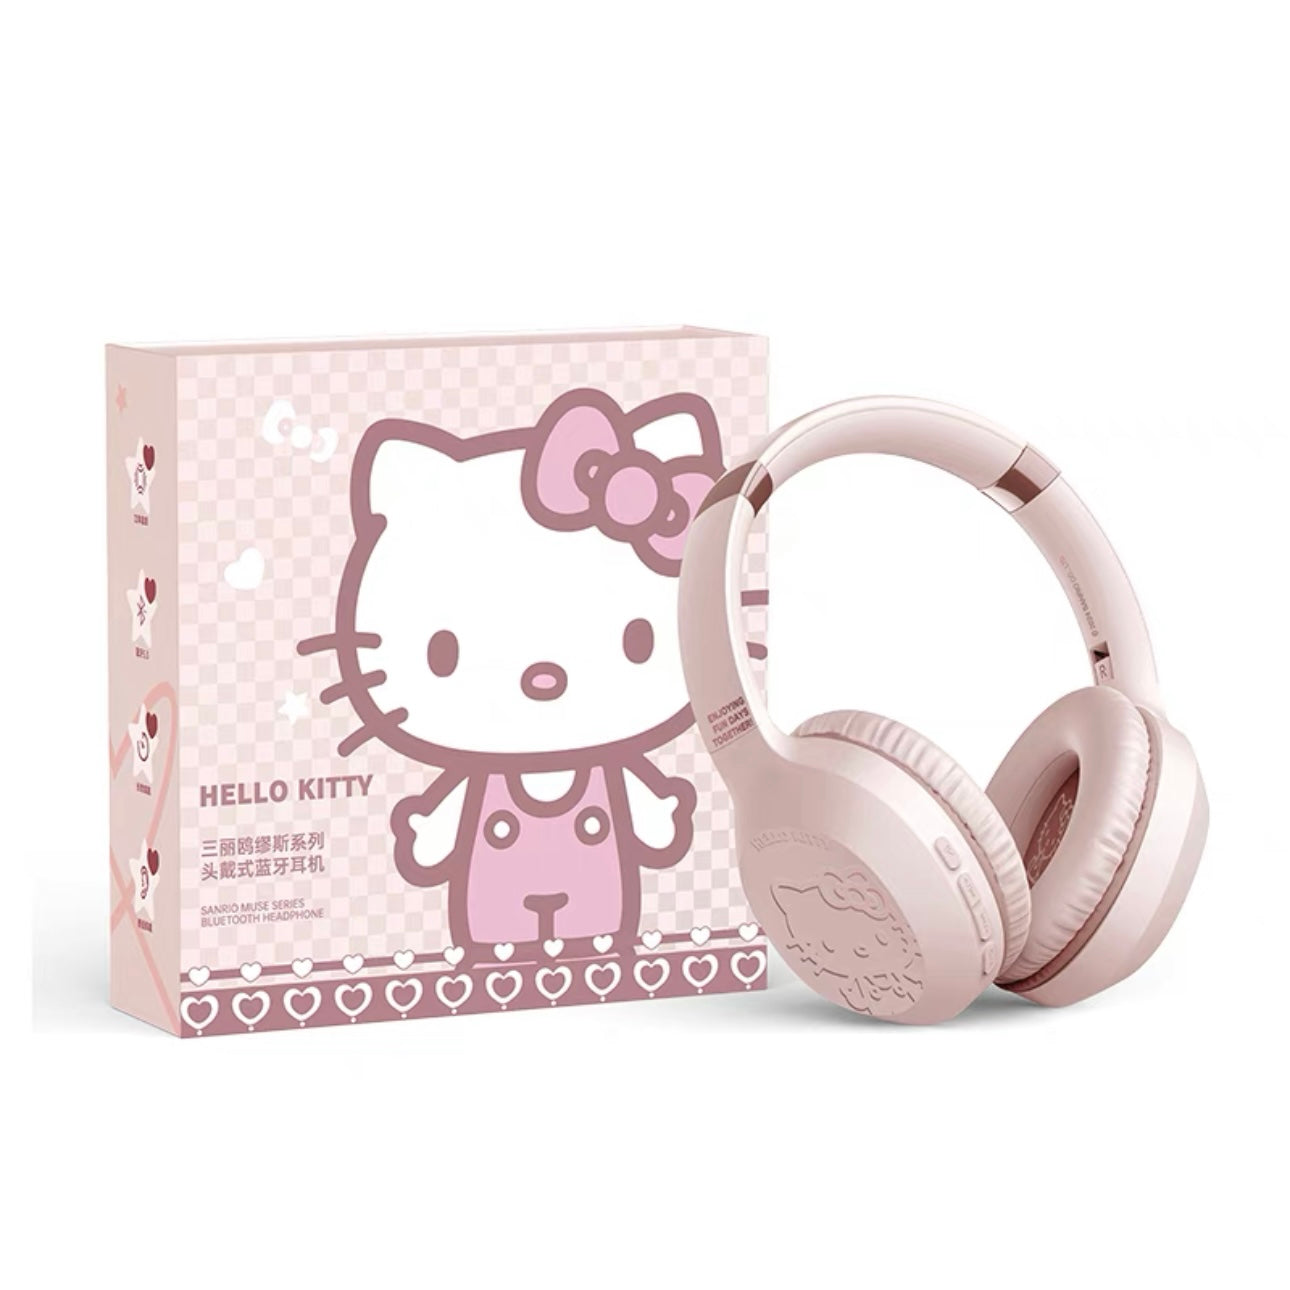 Sanrio Bluetooth Headphones Over Ear, 35H Playtime Retractable Foldable Headphones for Home Office Cellphone PC Ect.